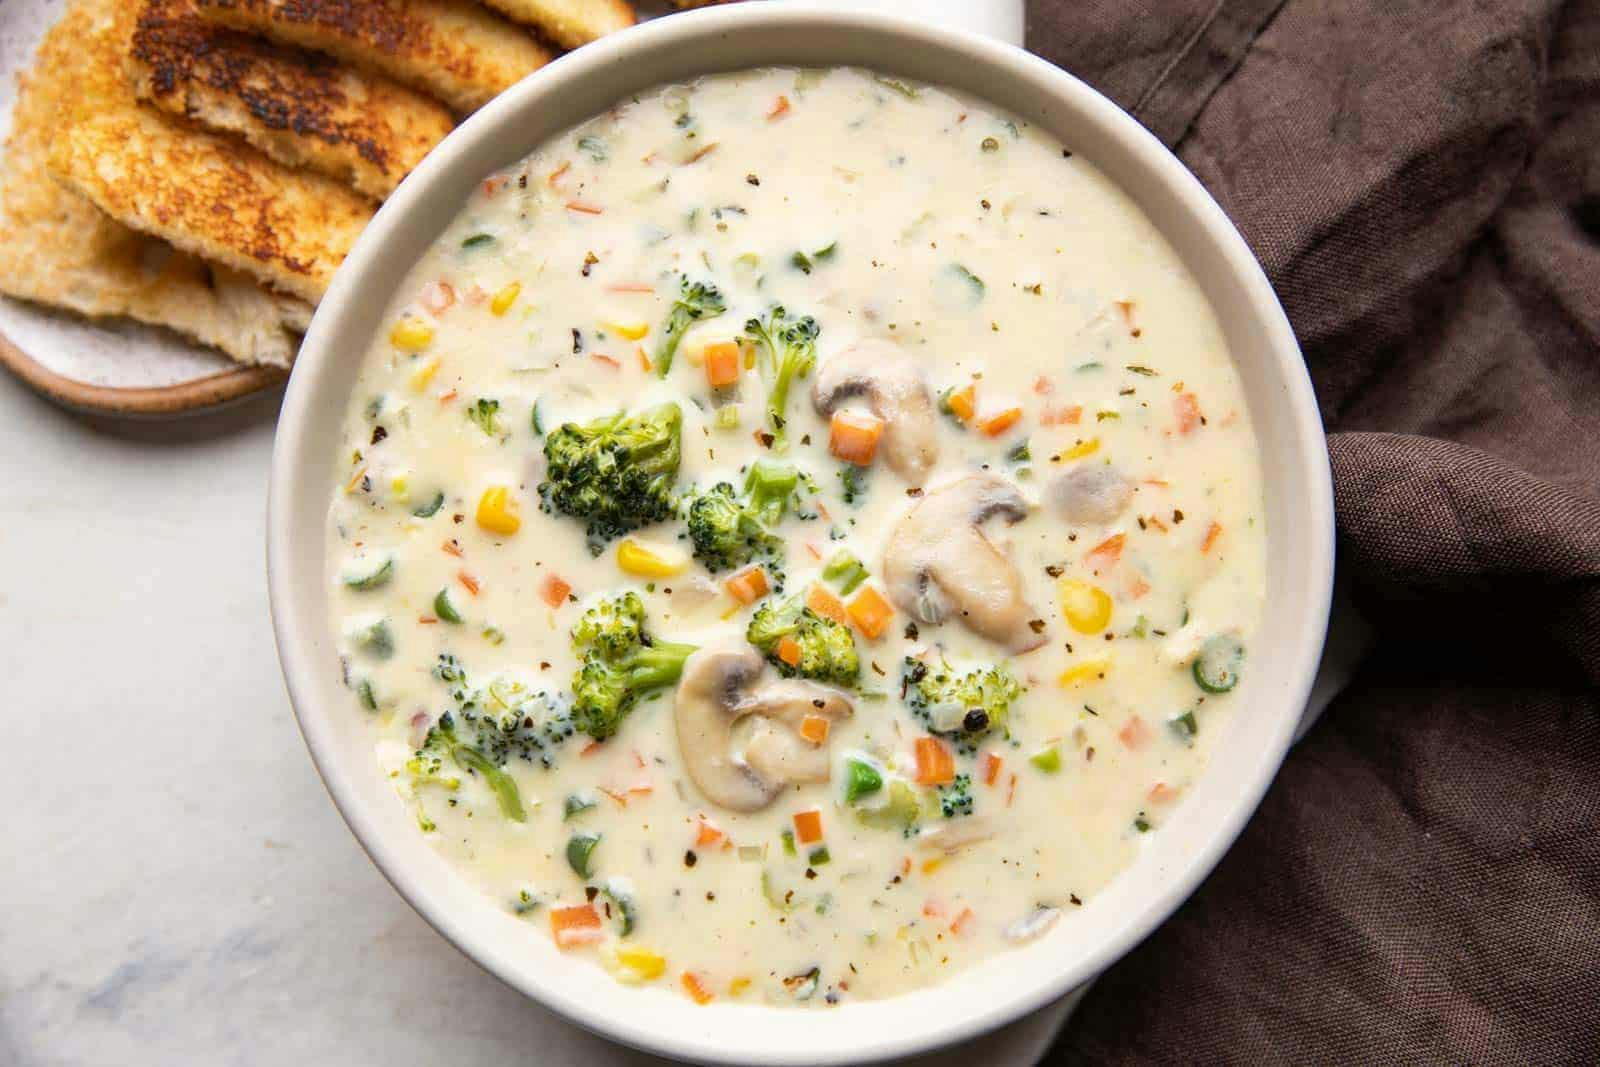 Recipes for creamy soups